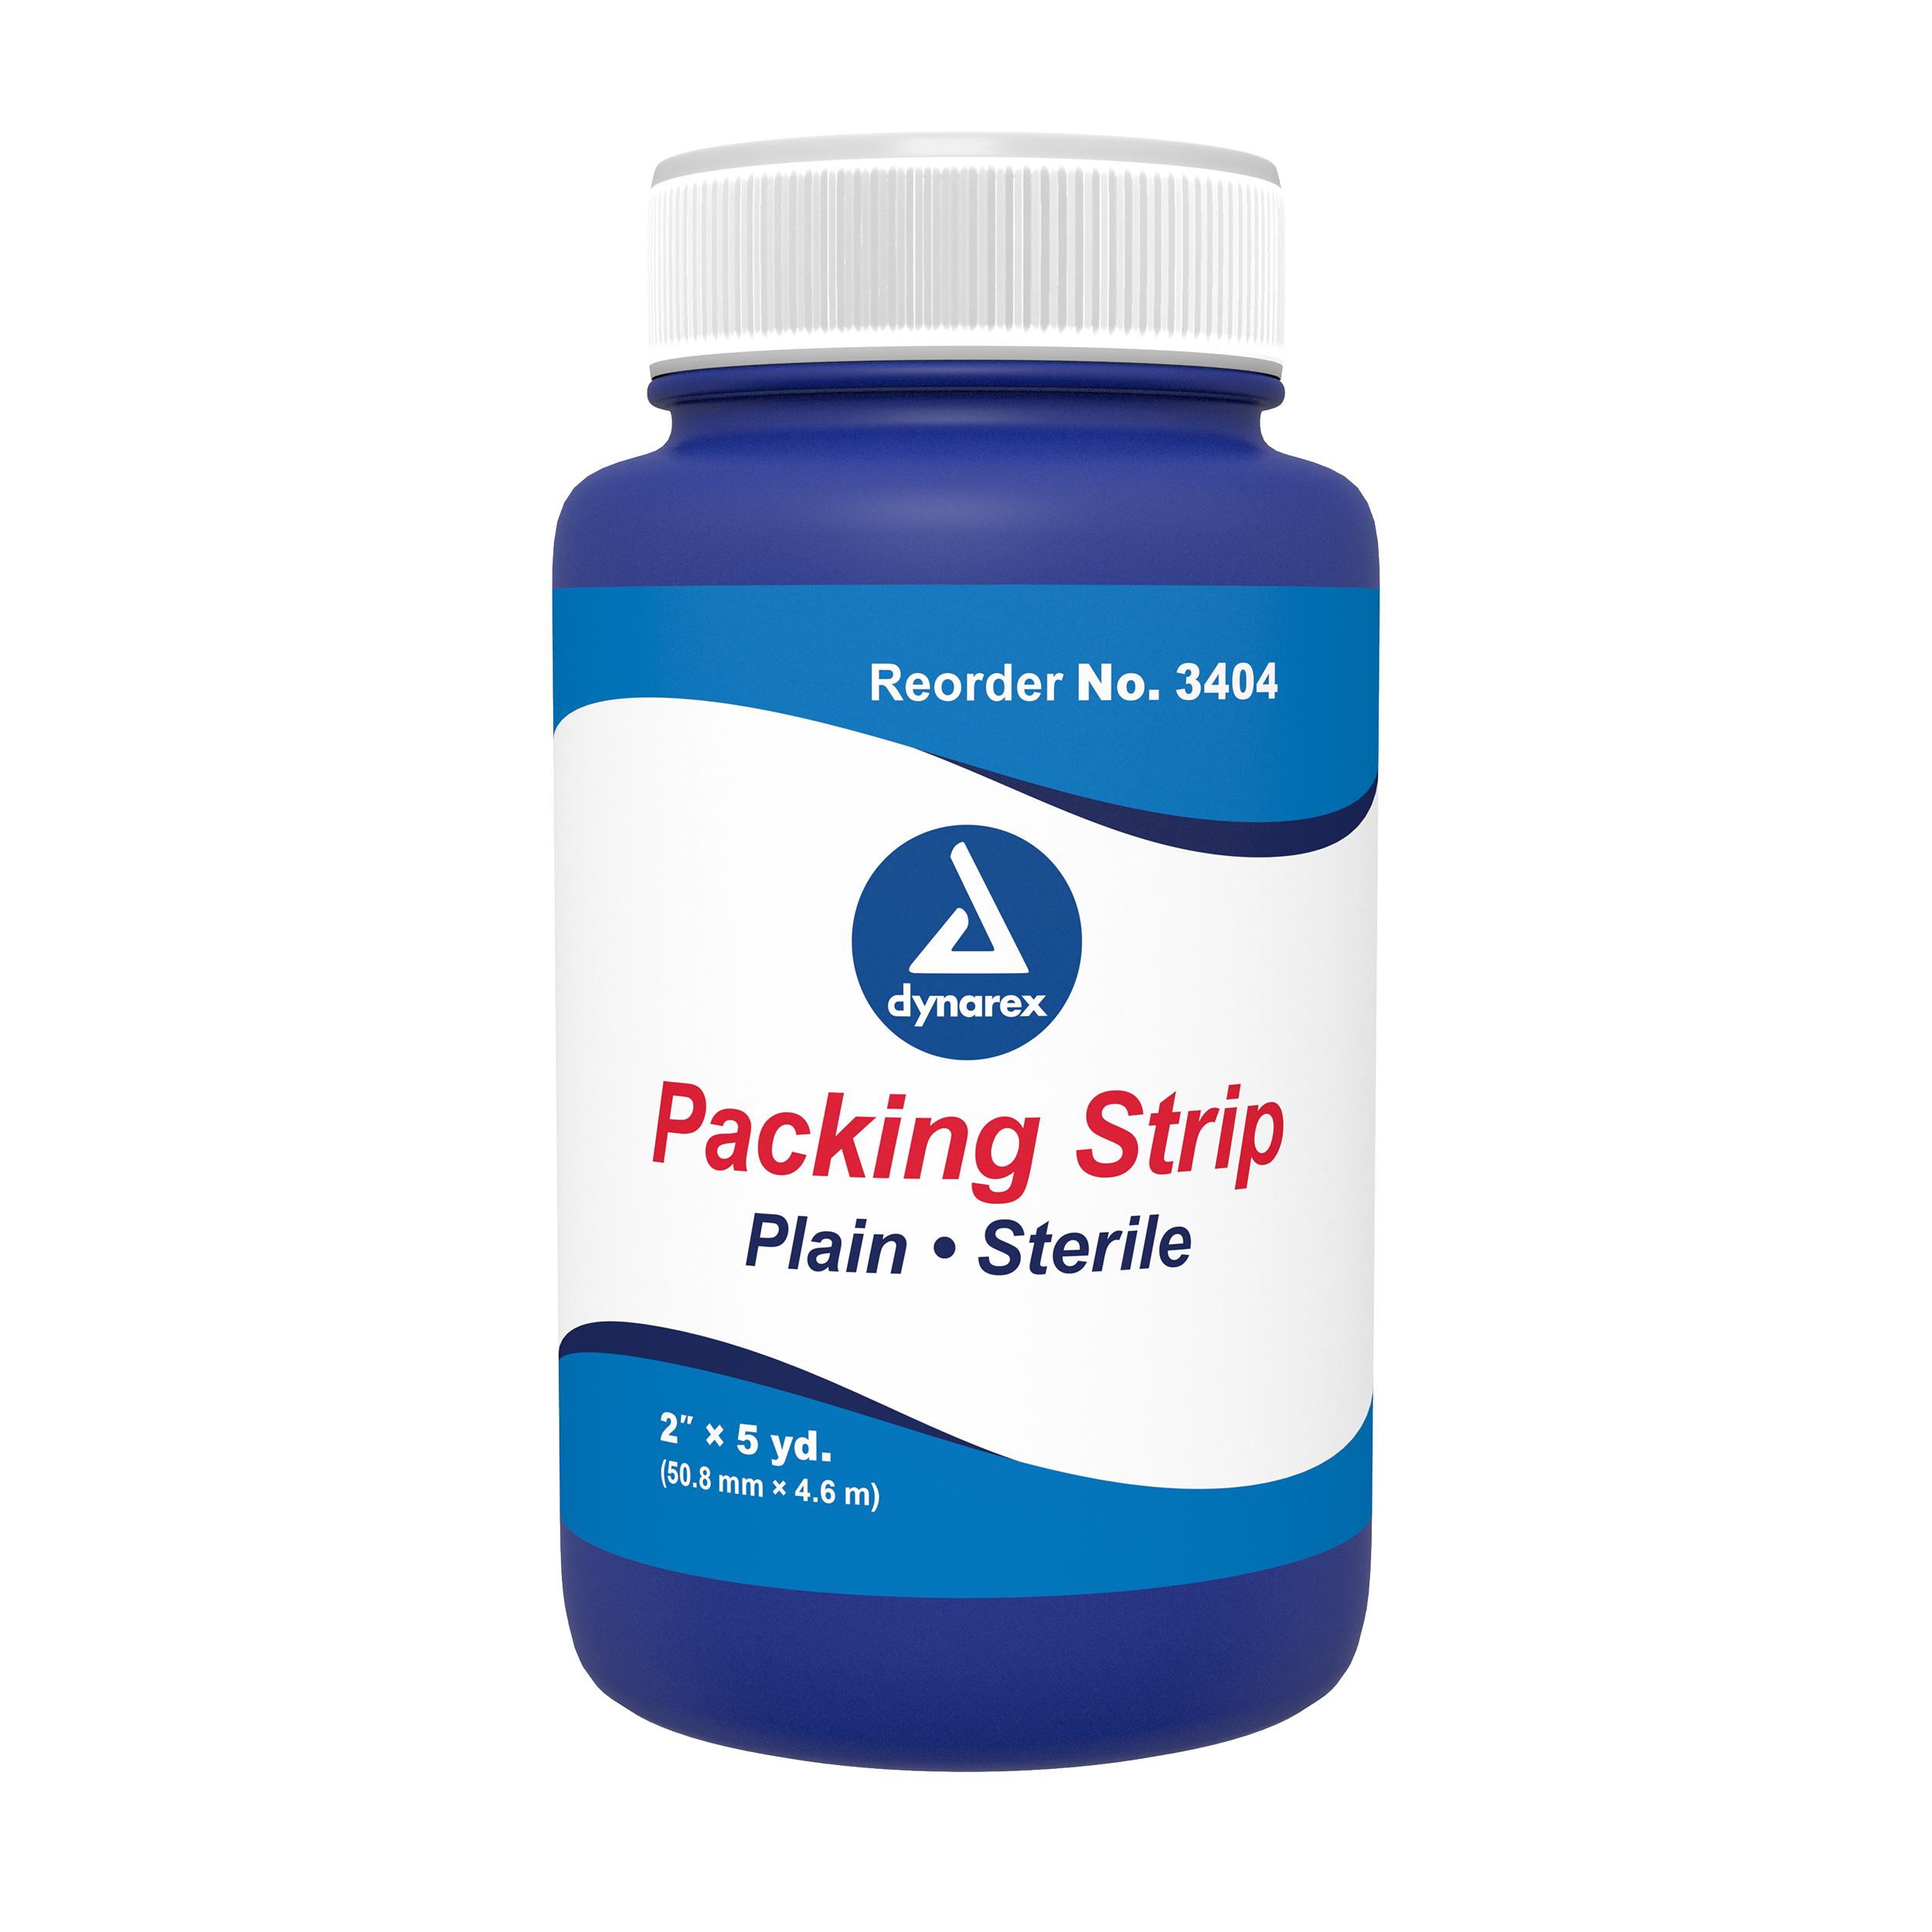 Packing Strips Plain - Sterile 2in x 5 yds